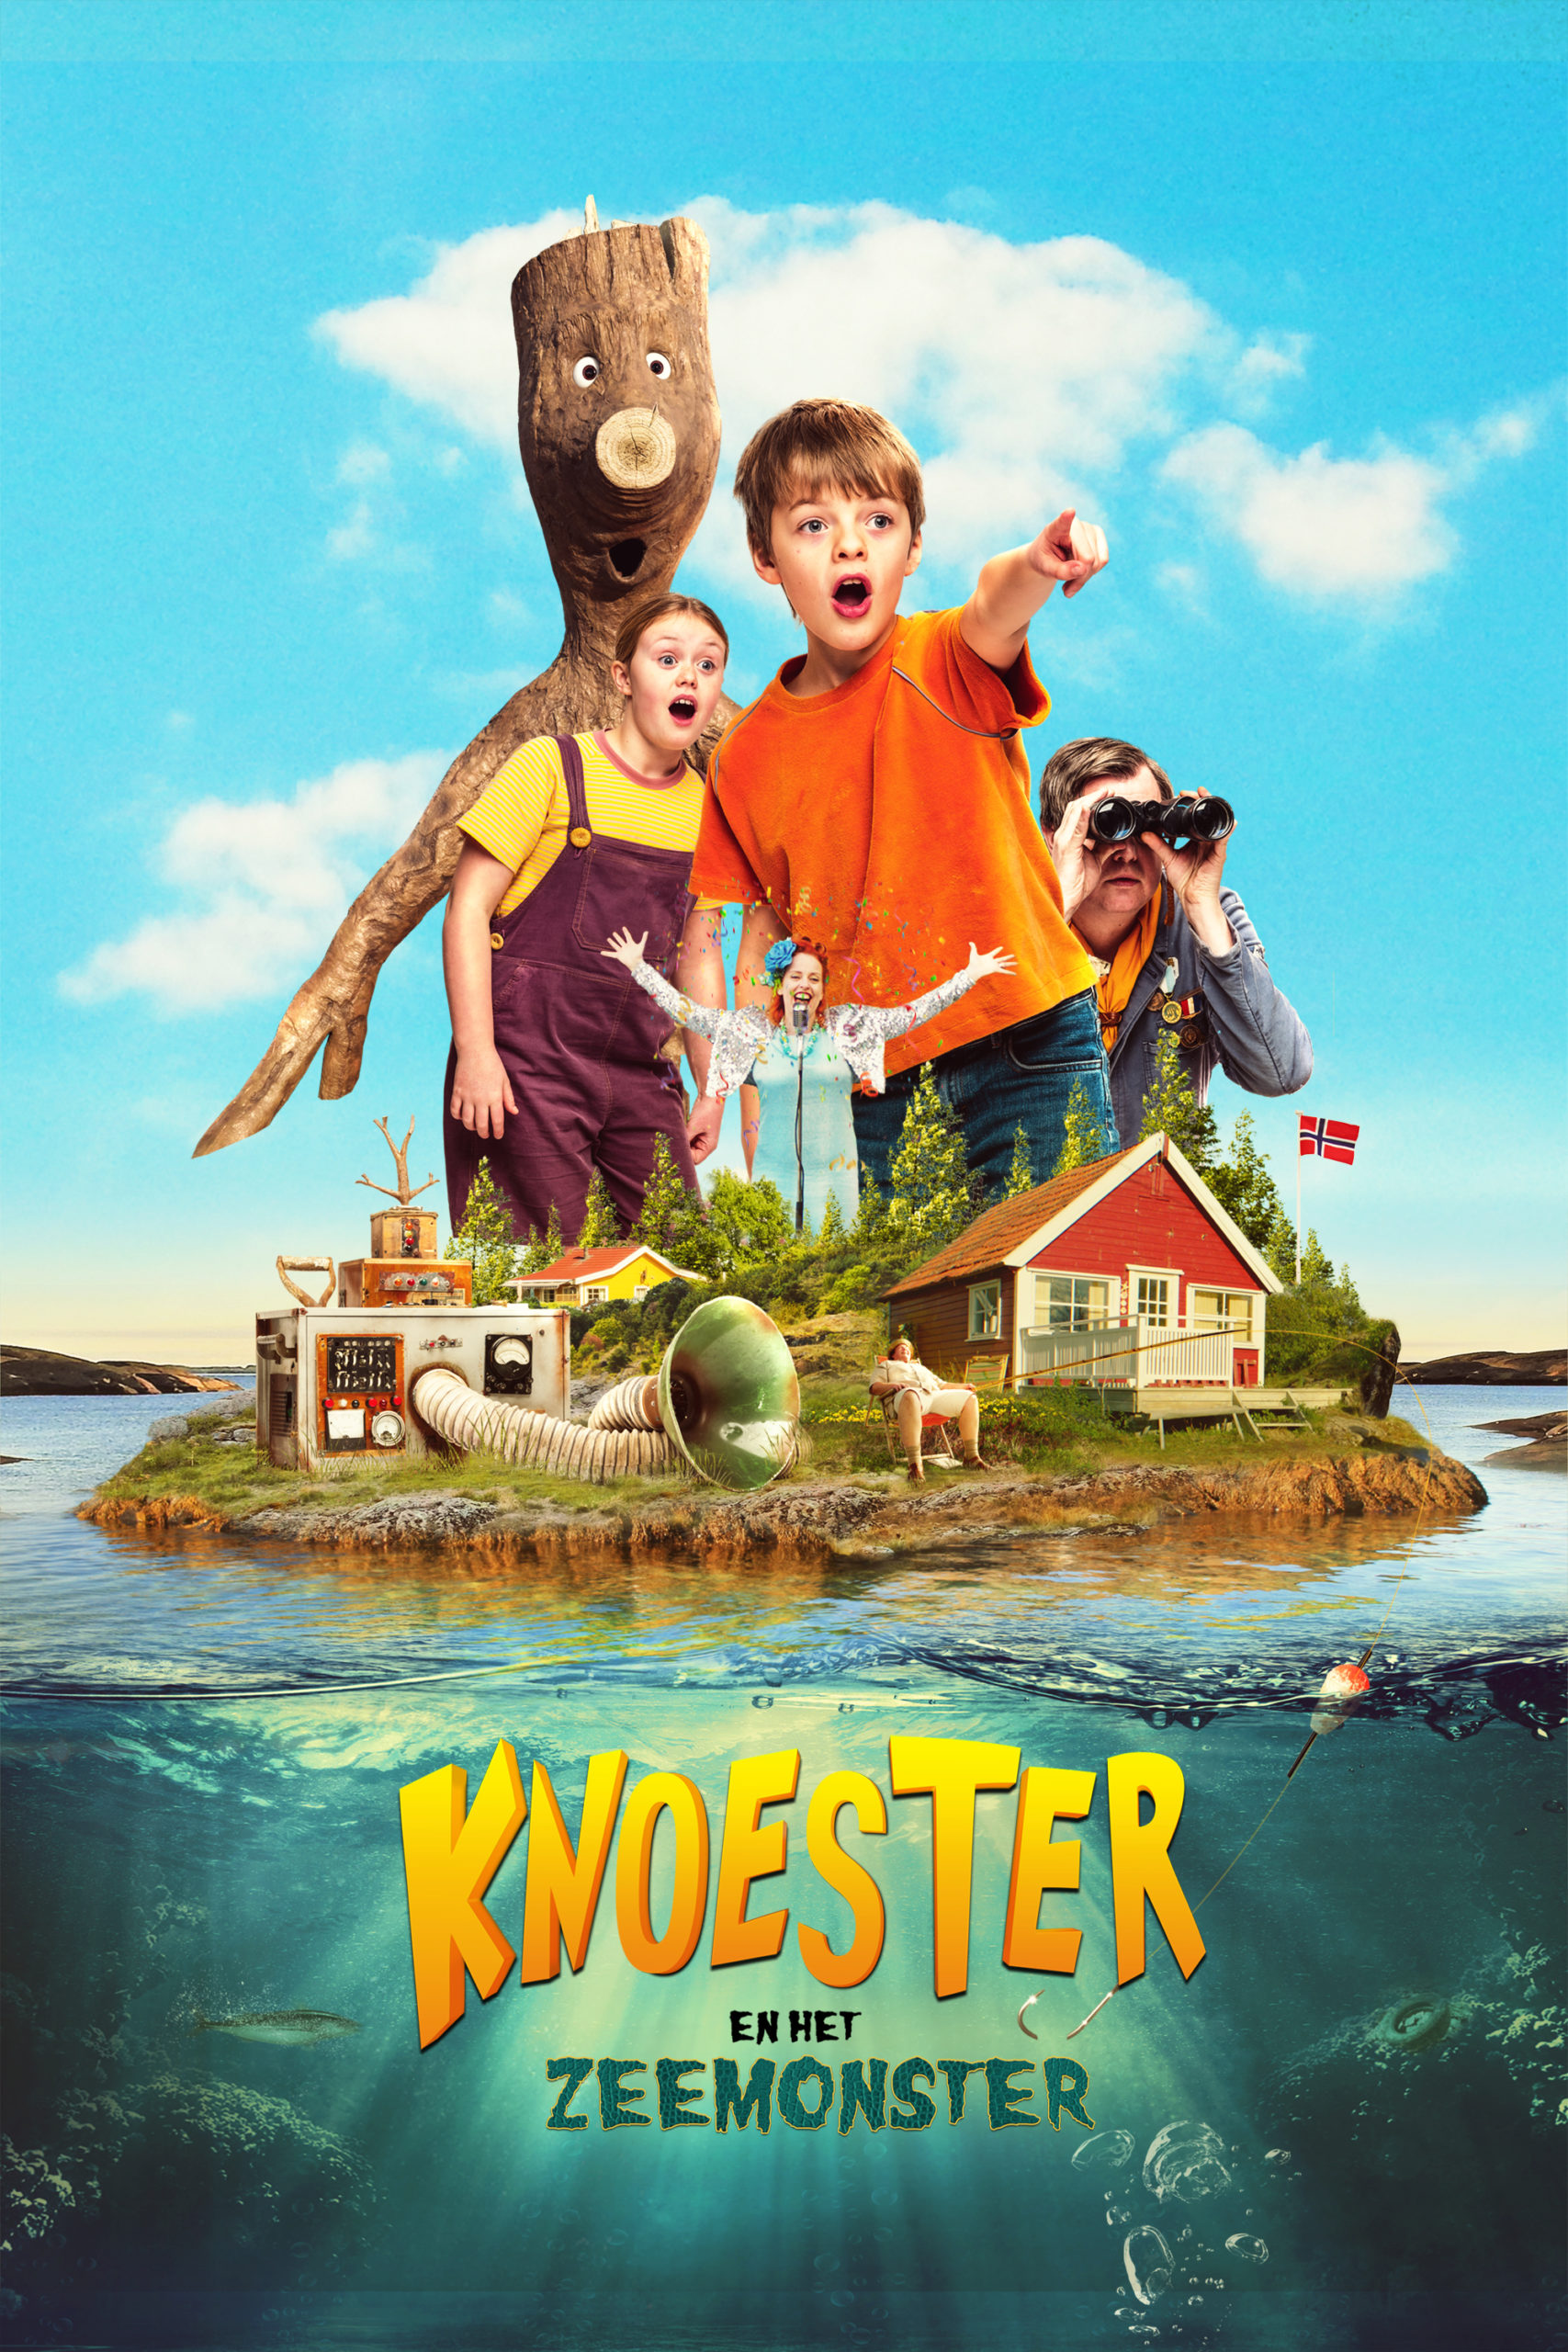 Knoester and the sea monster